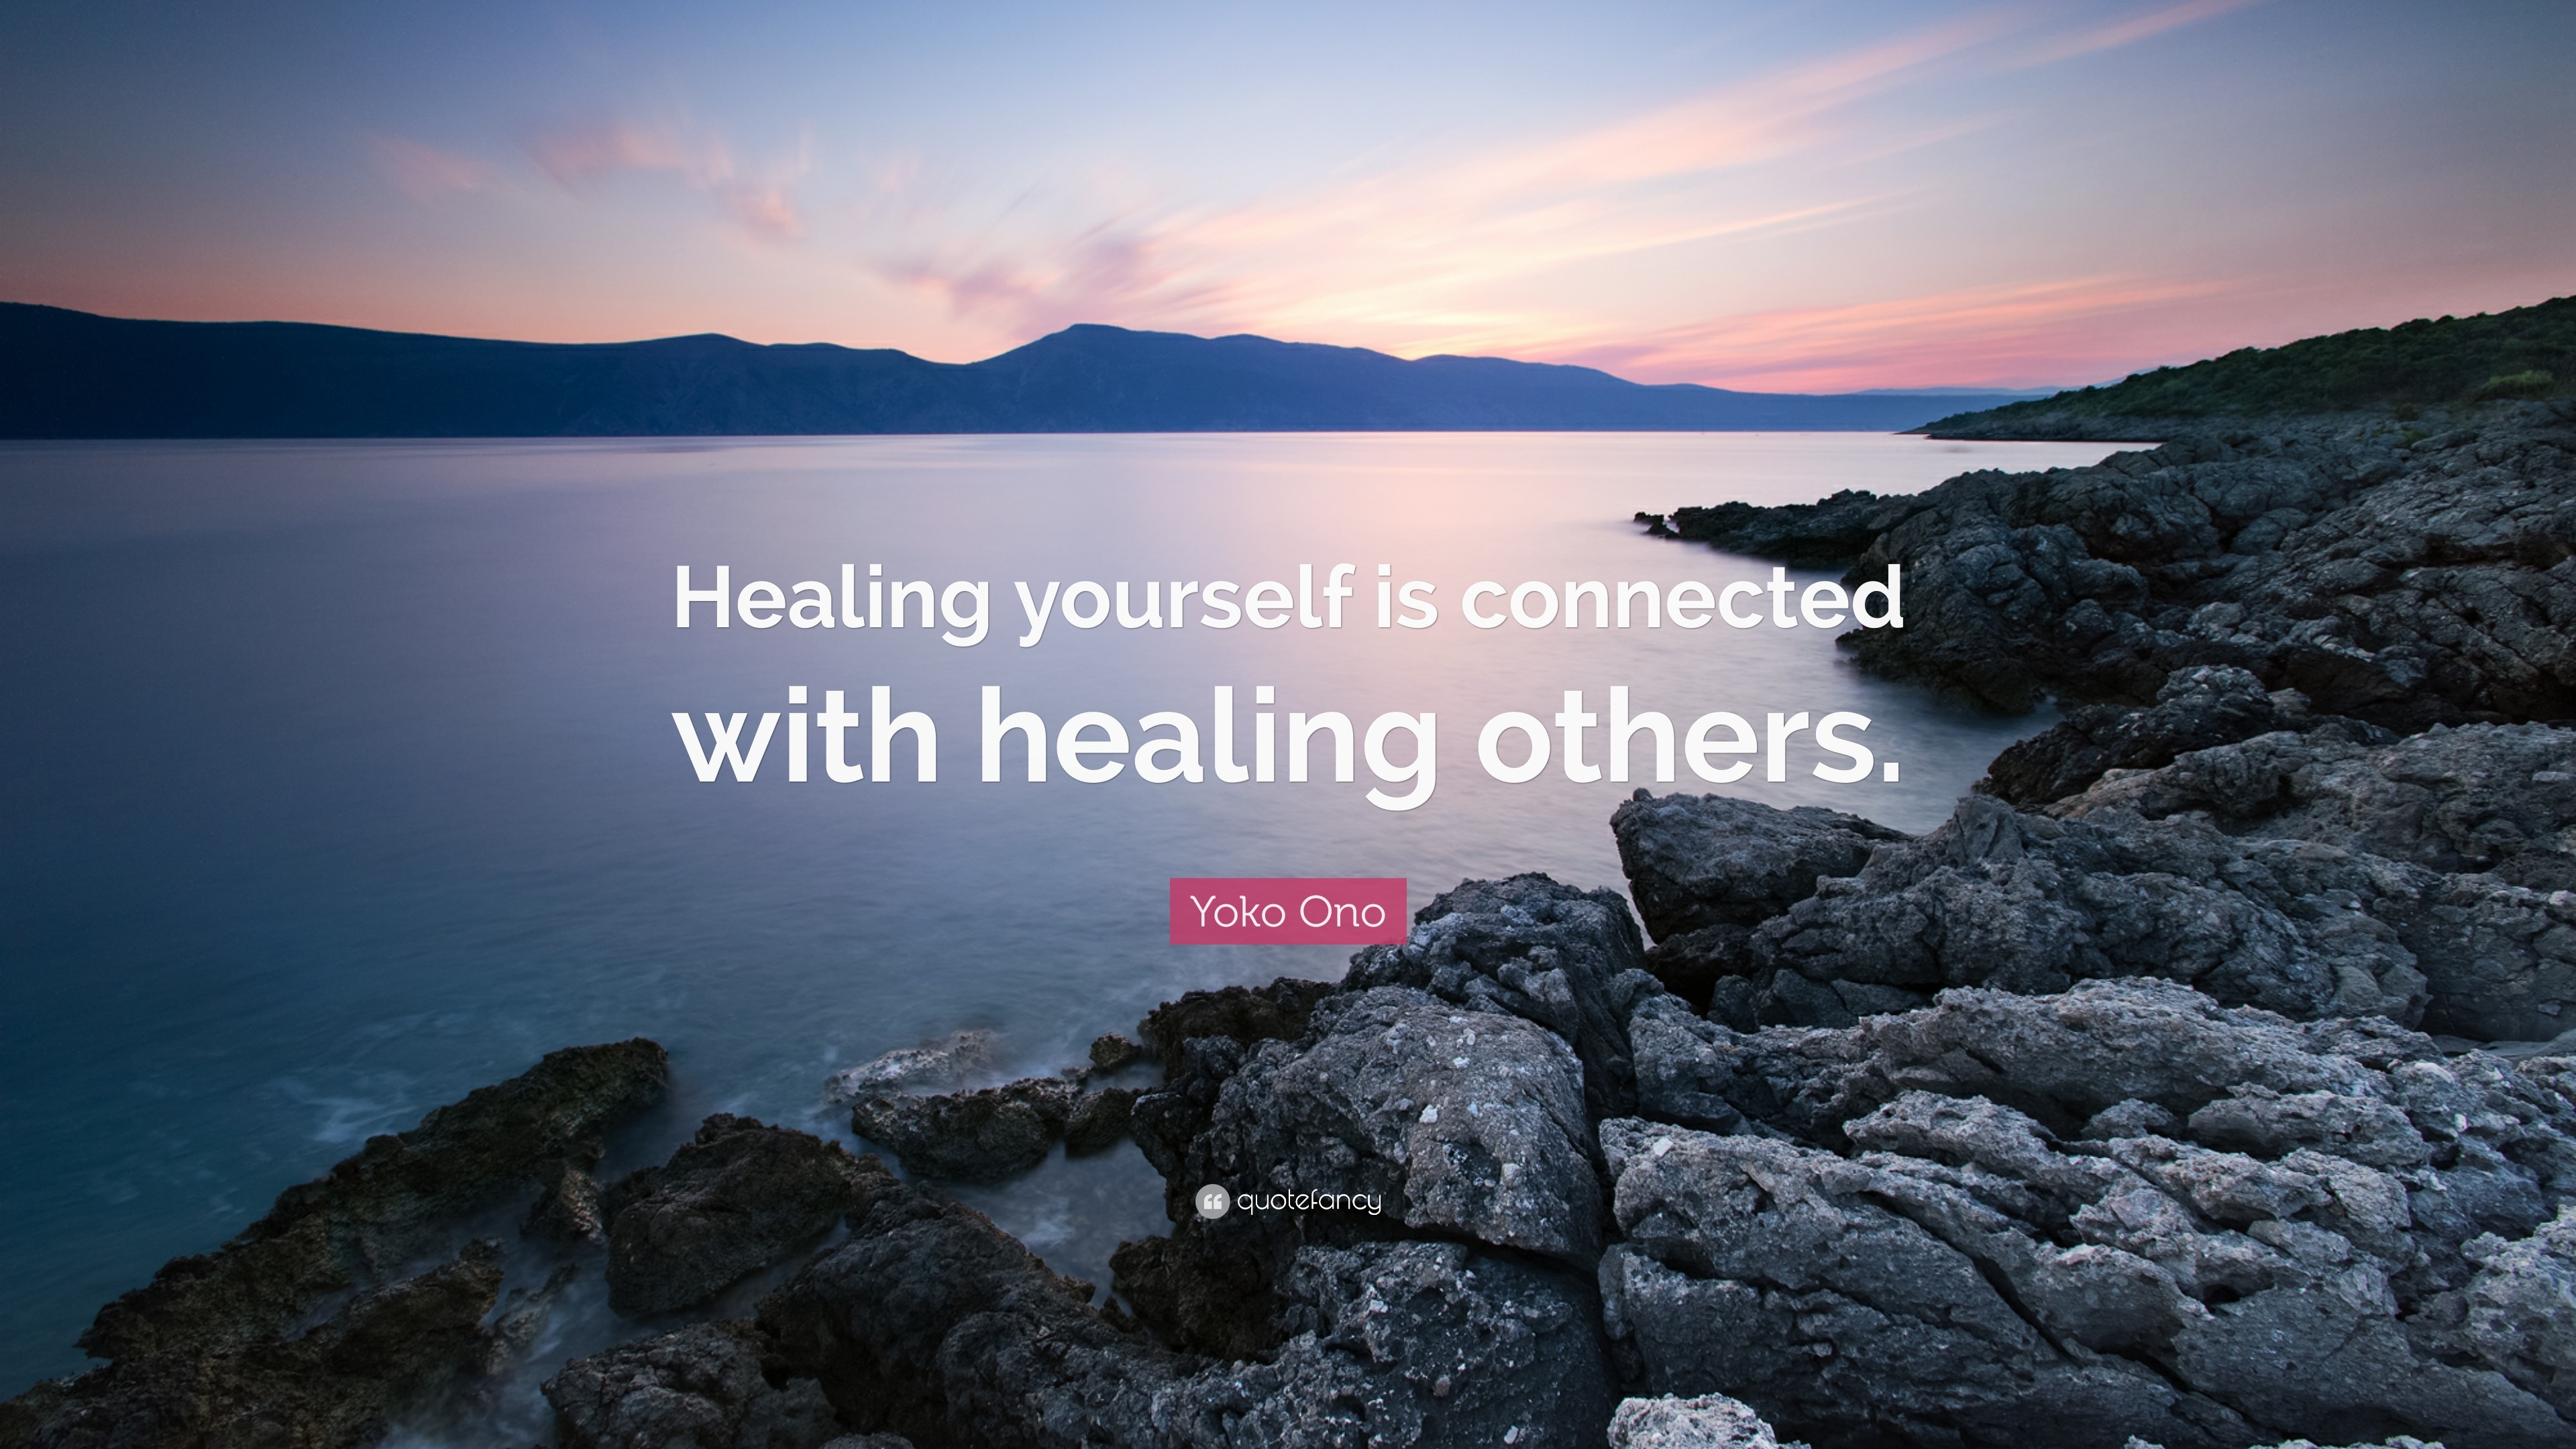 3840x2160 Yoko Ono Quote: “Healing yourself is connected with healing others.”